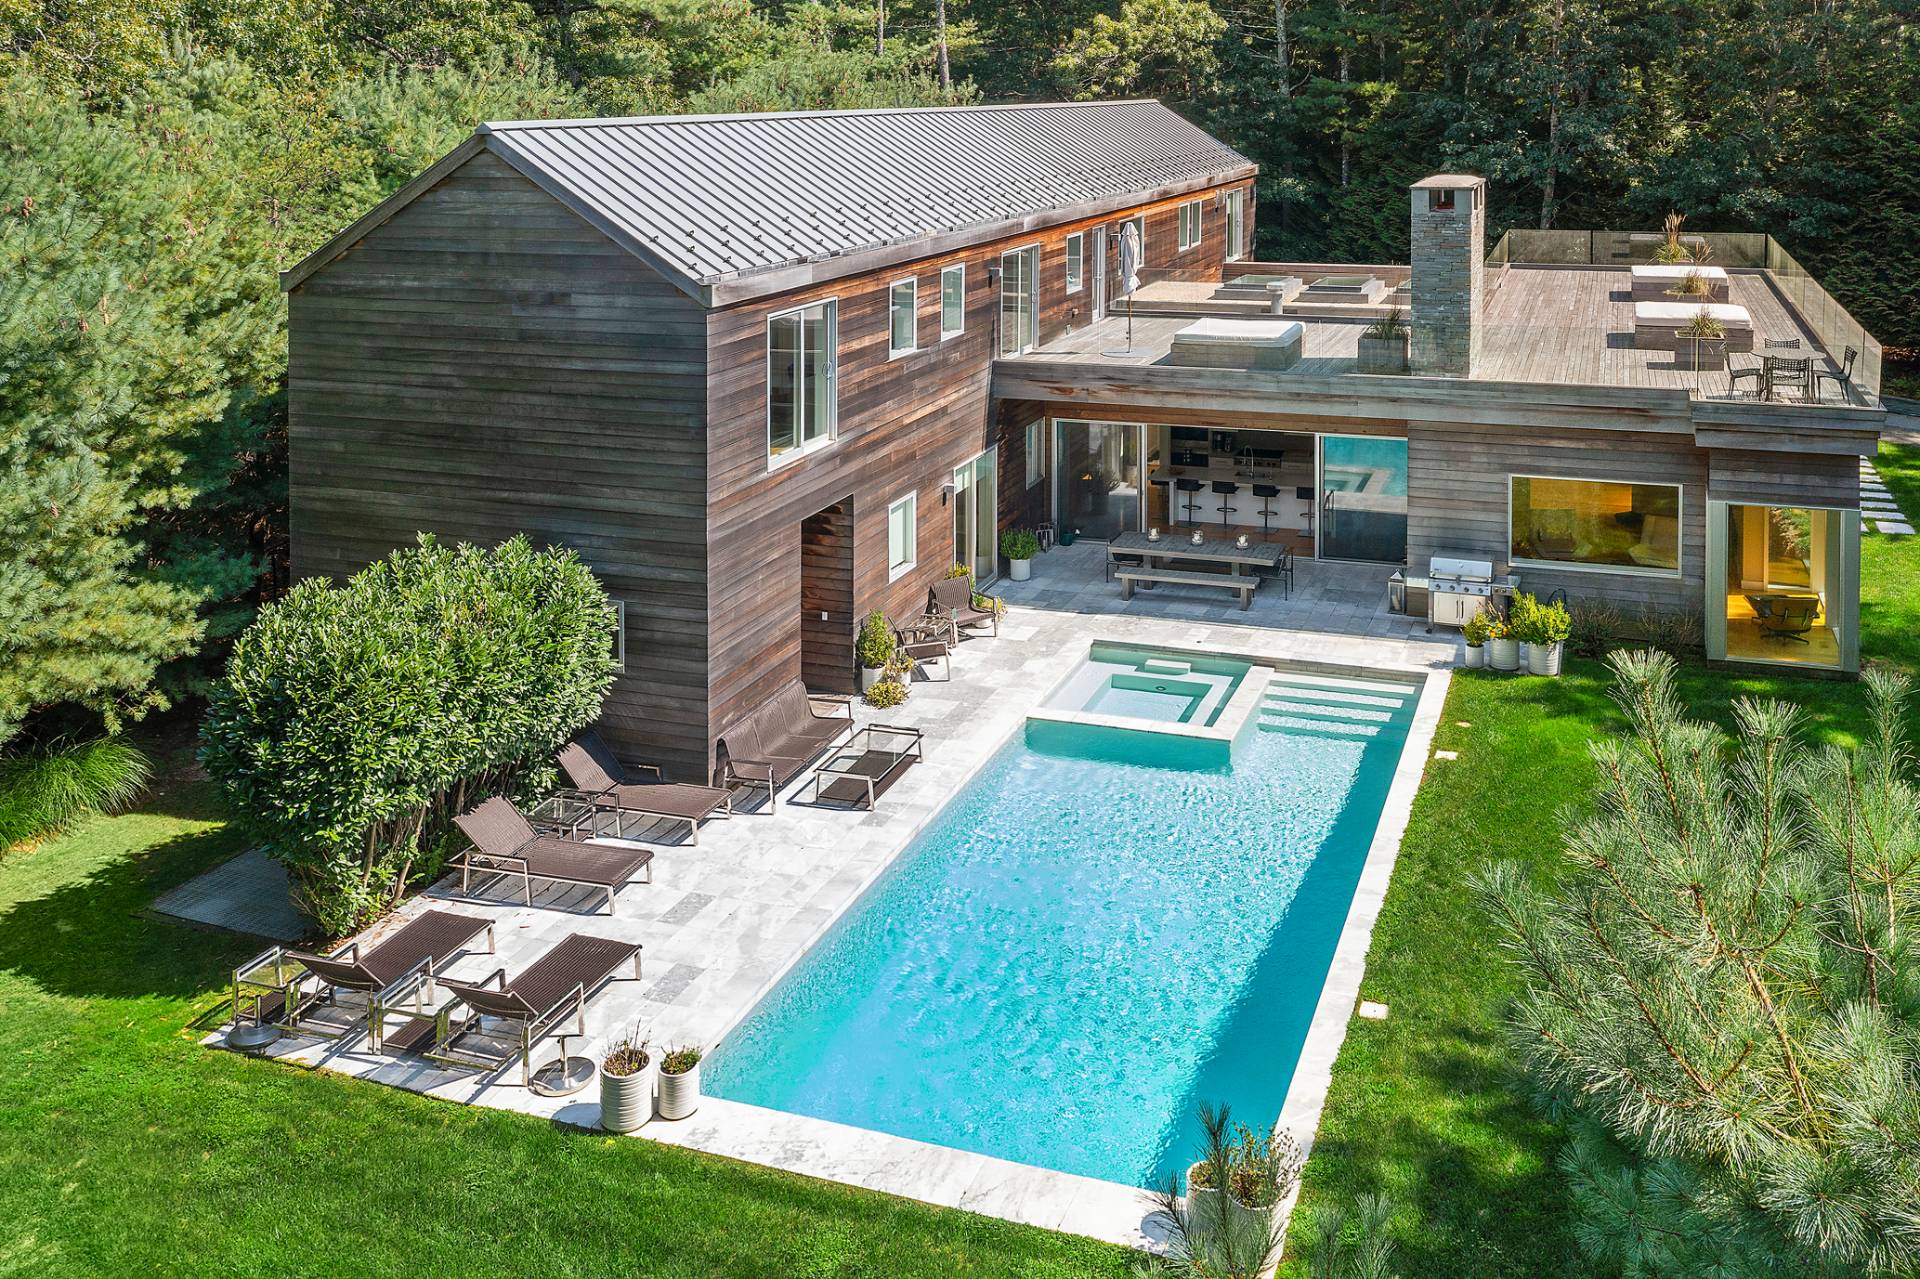 a aerial view of a house with swimming pool